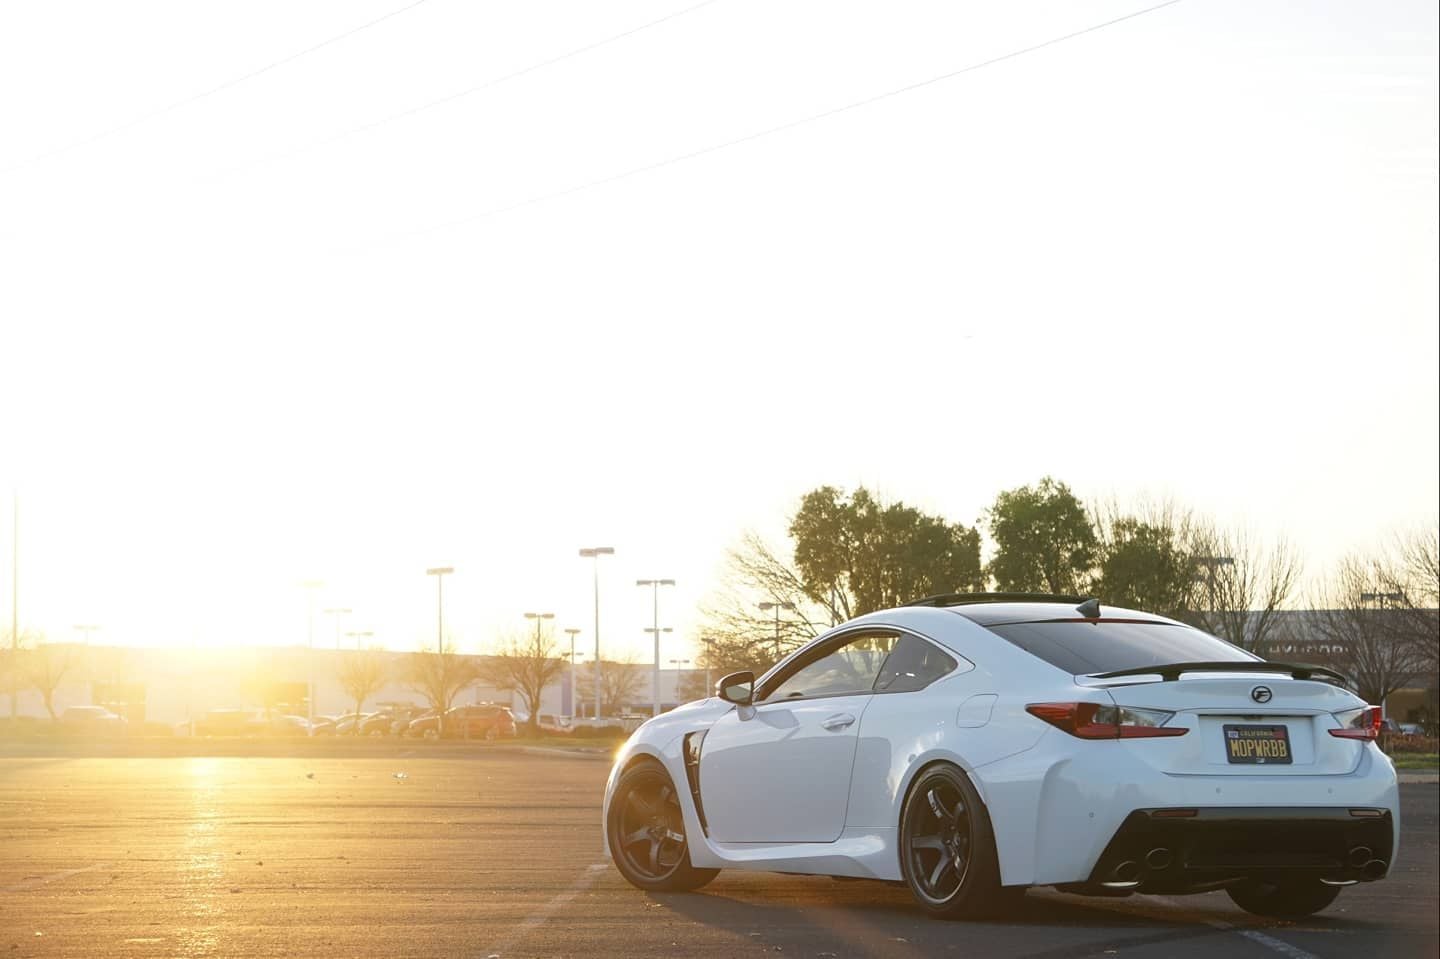 2015 Lexus RC F - 2015 rc f fbo - Used - VIN JTHHP5BC7F5002230 - 68,900 Miles - 8 cyl - 2WD - Automatic - Coupe - White - San Francisco, CA 94107, United States